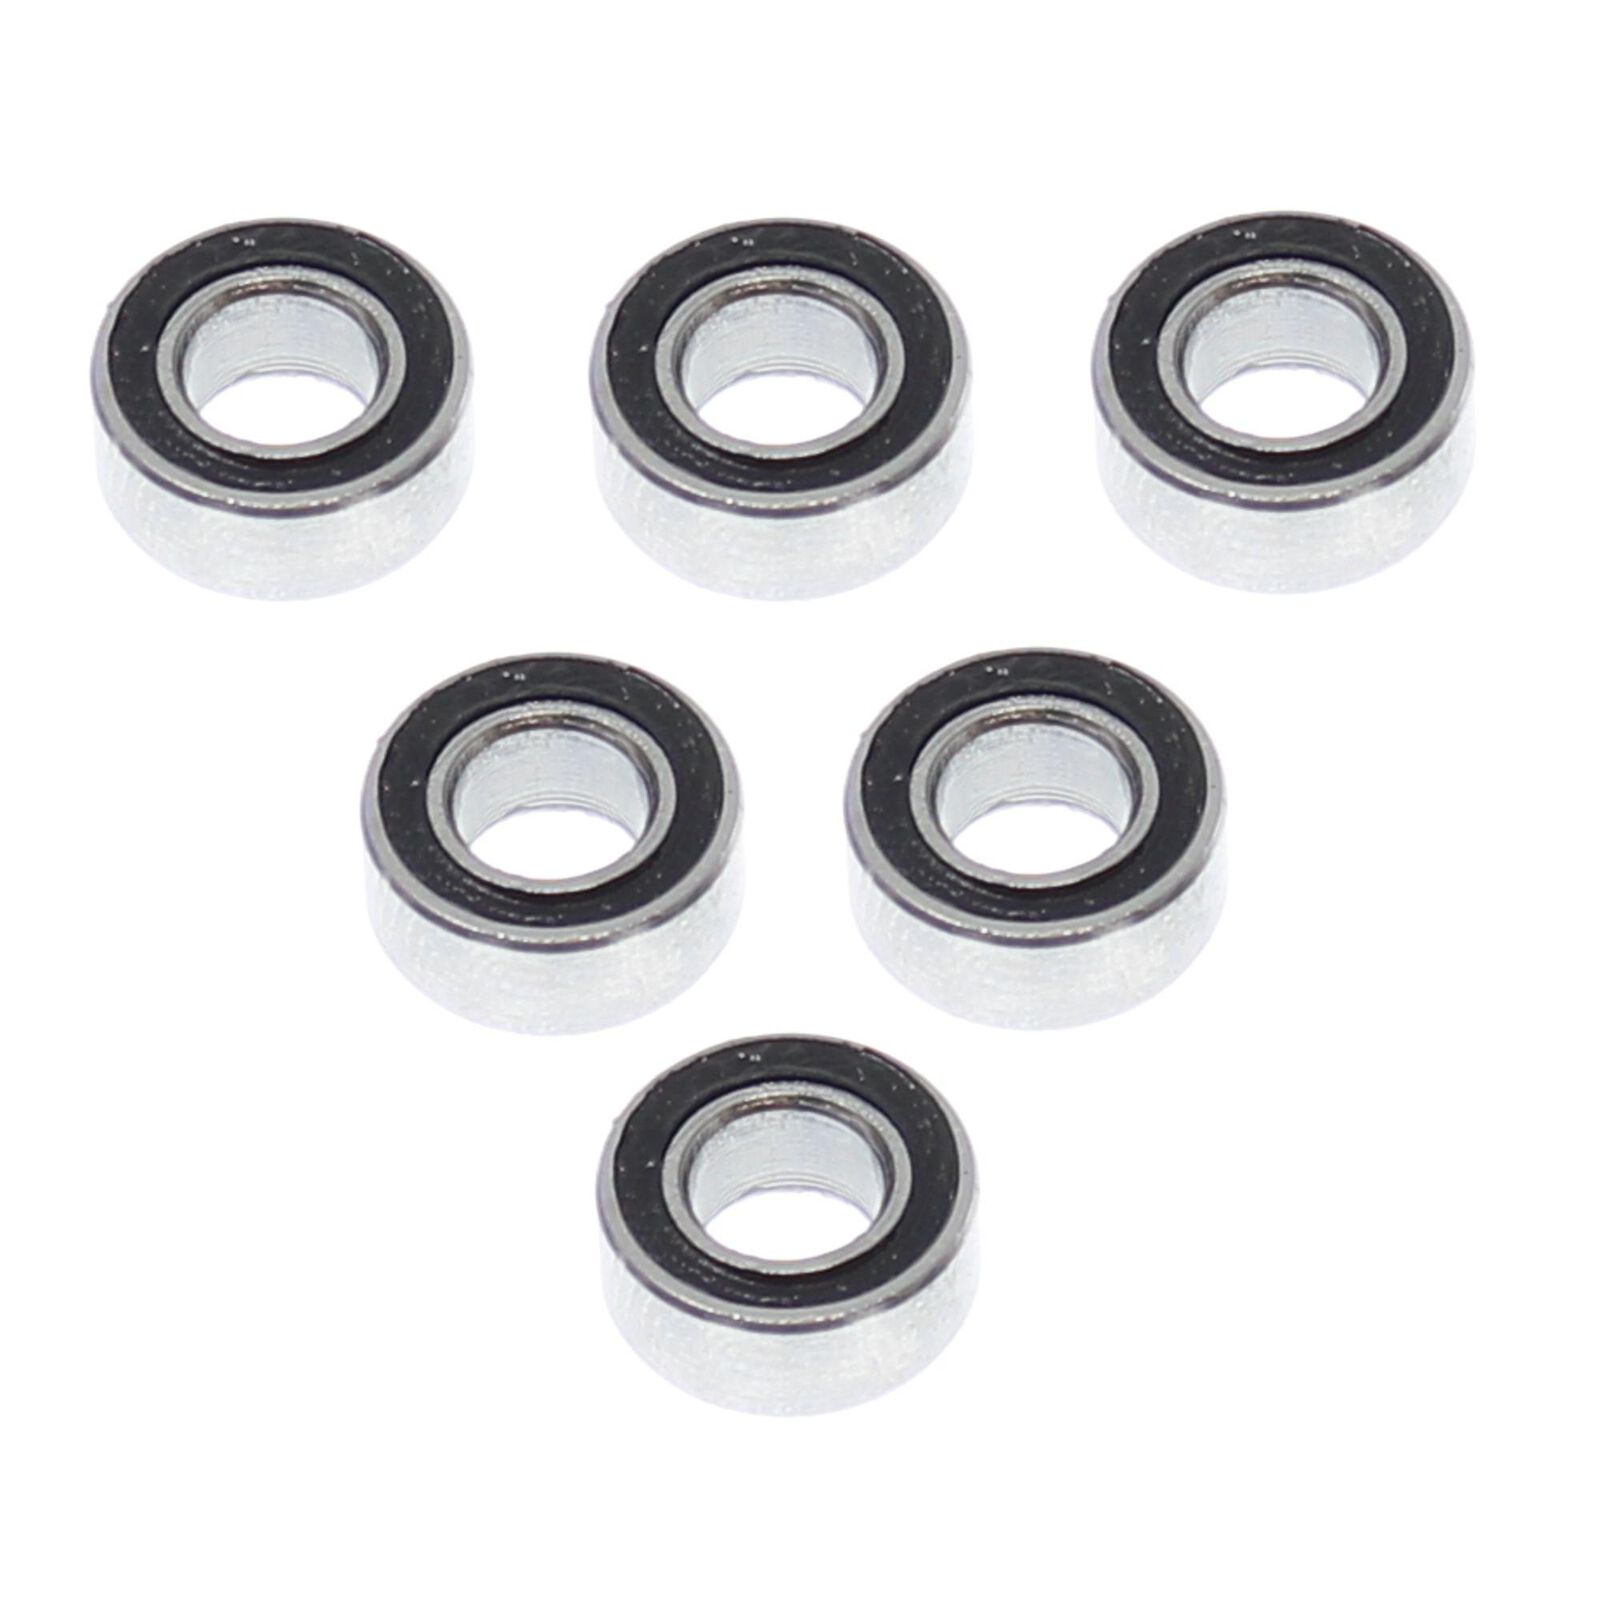 5x10x4mm Rubber Sealed Ball Bearings (6)